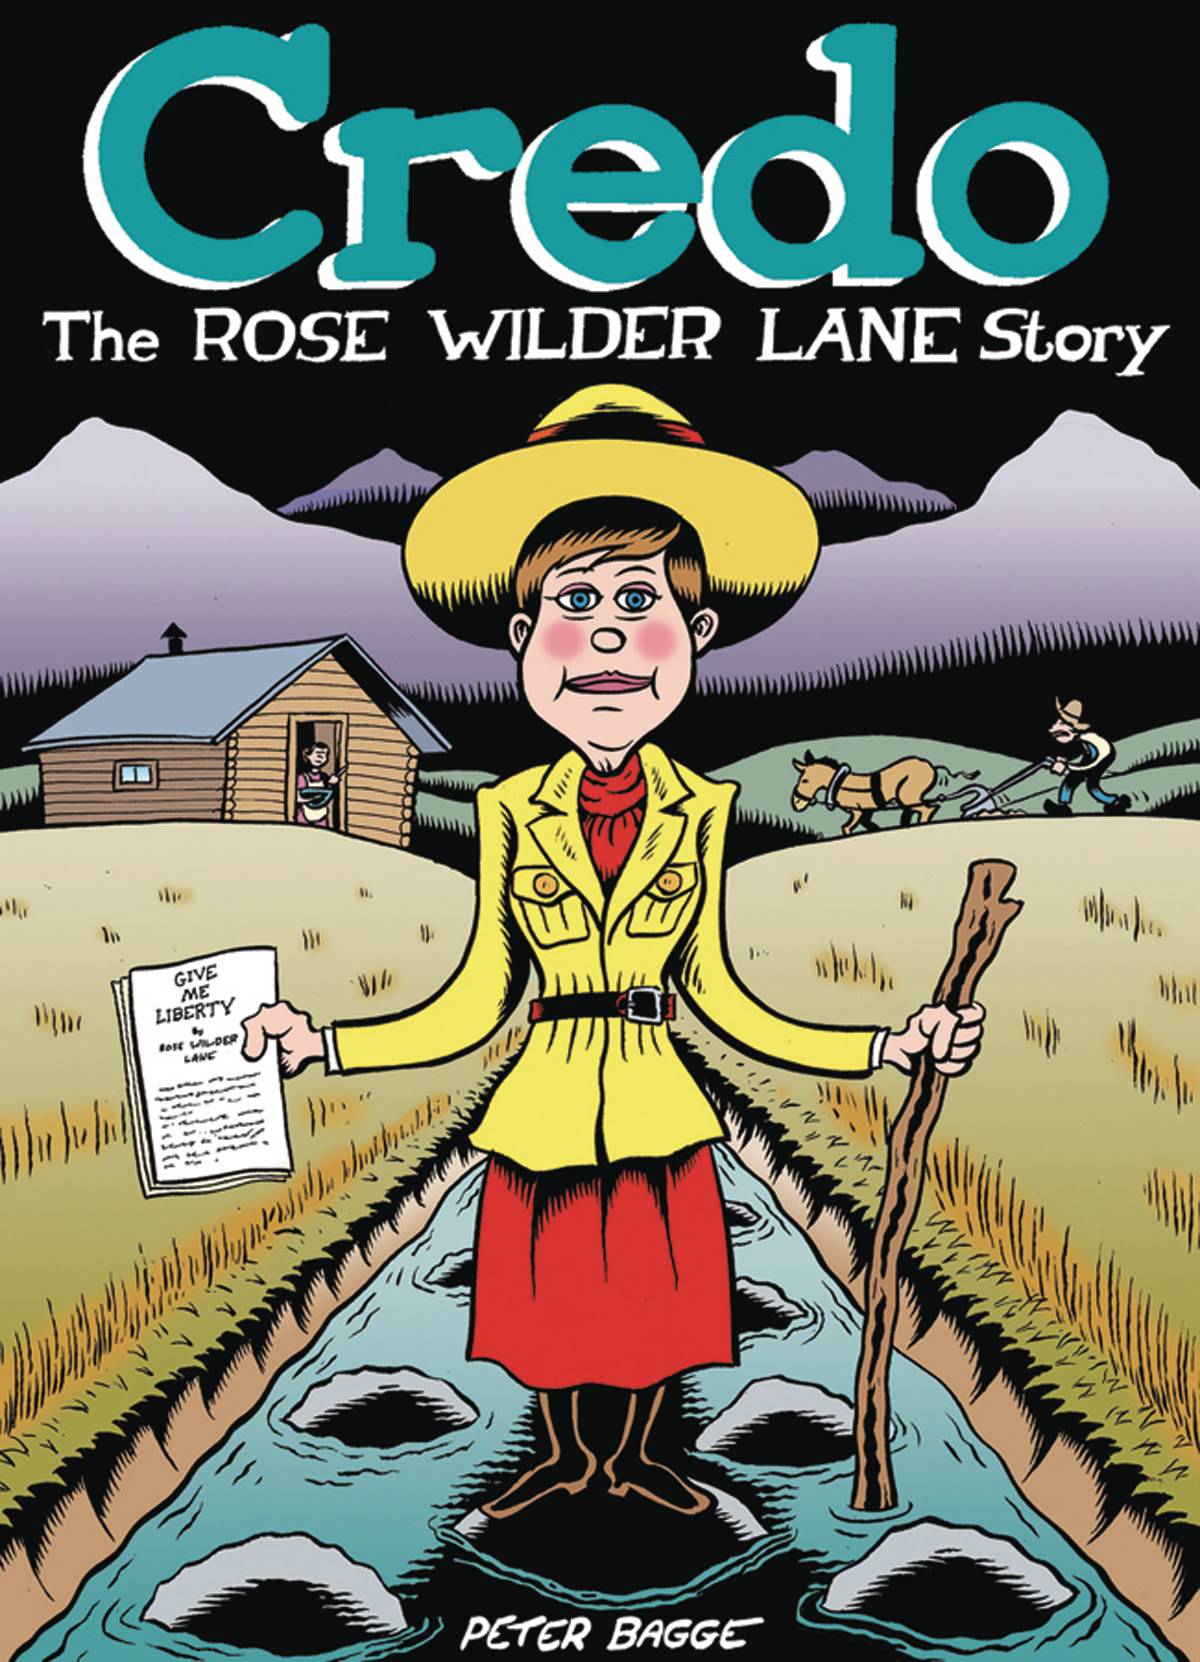 Credo The Rose Wilder Lane Story Hardcover by Peter Bagge